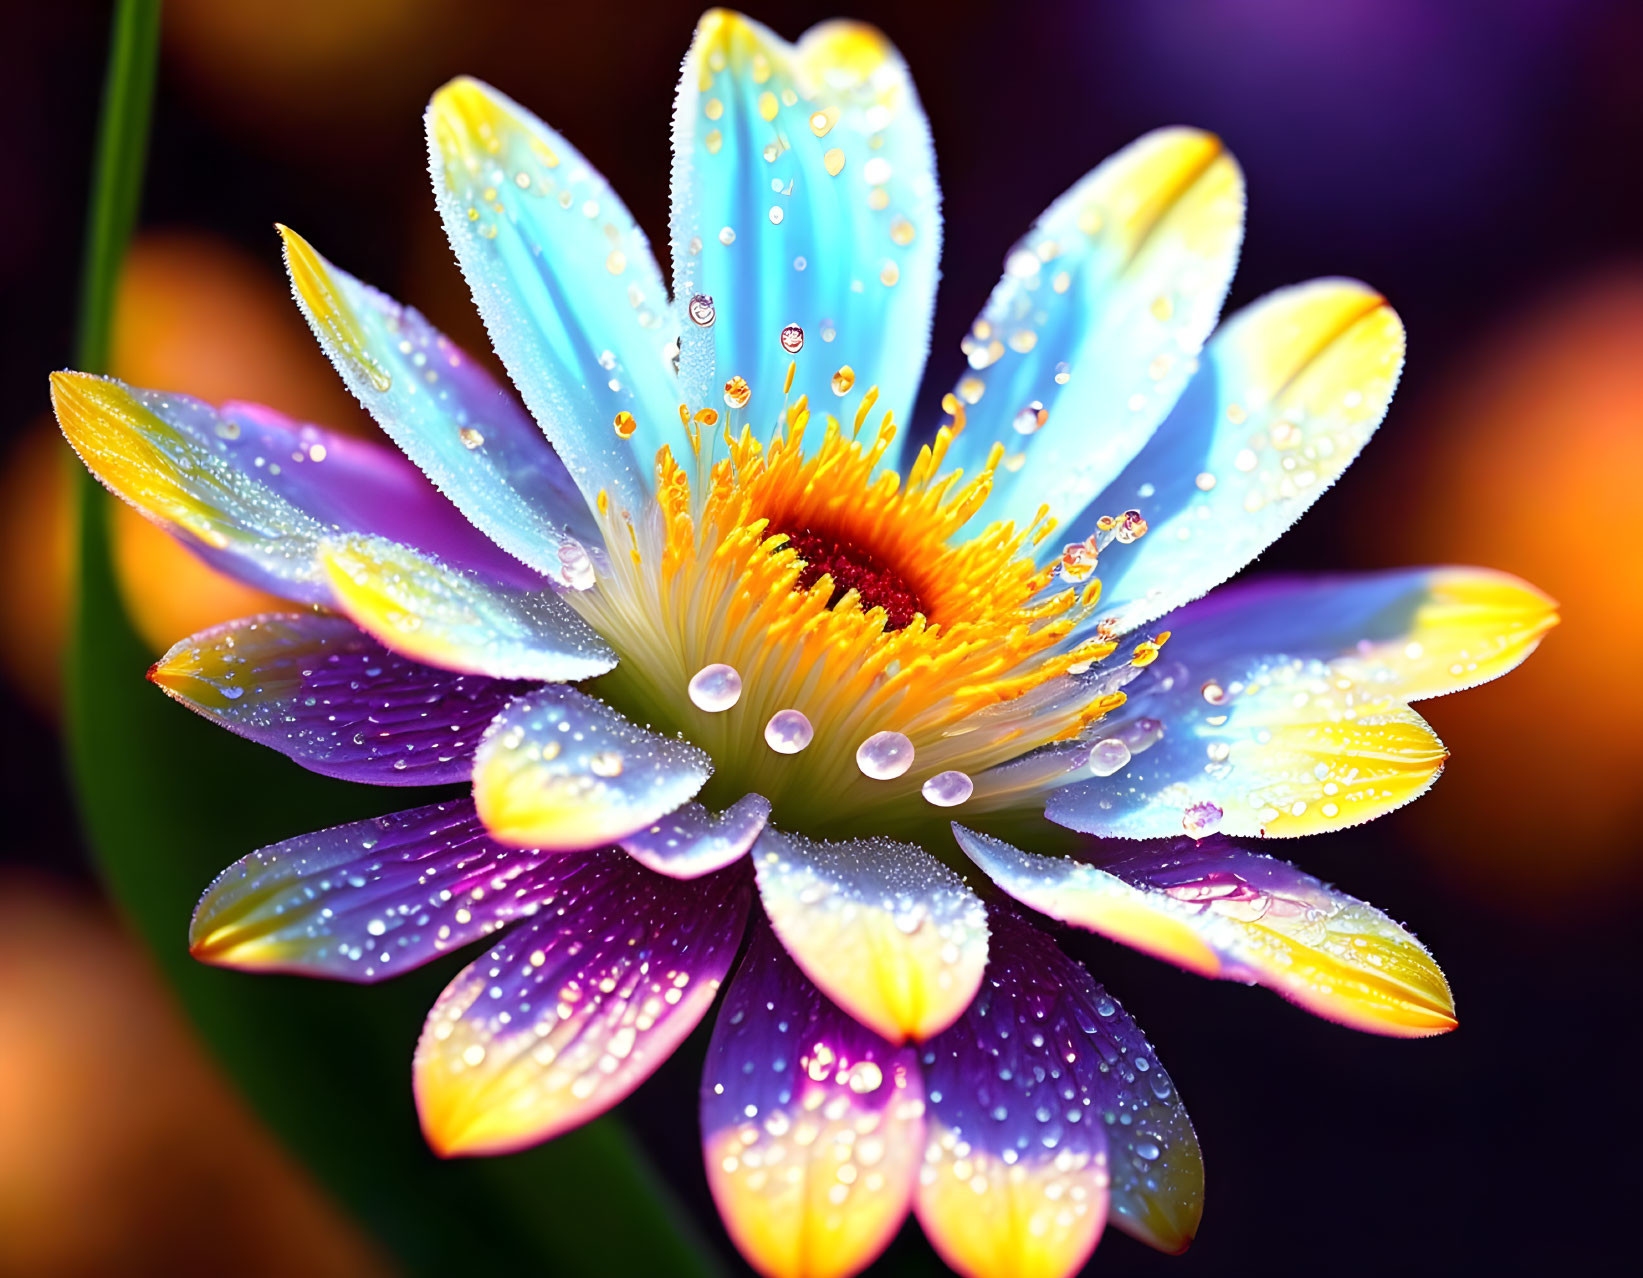  beautiful flower with dew drops in natural state;